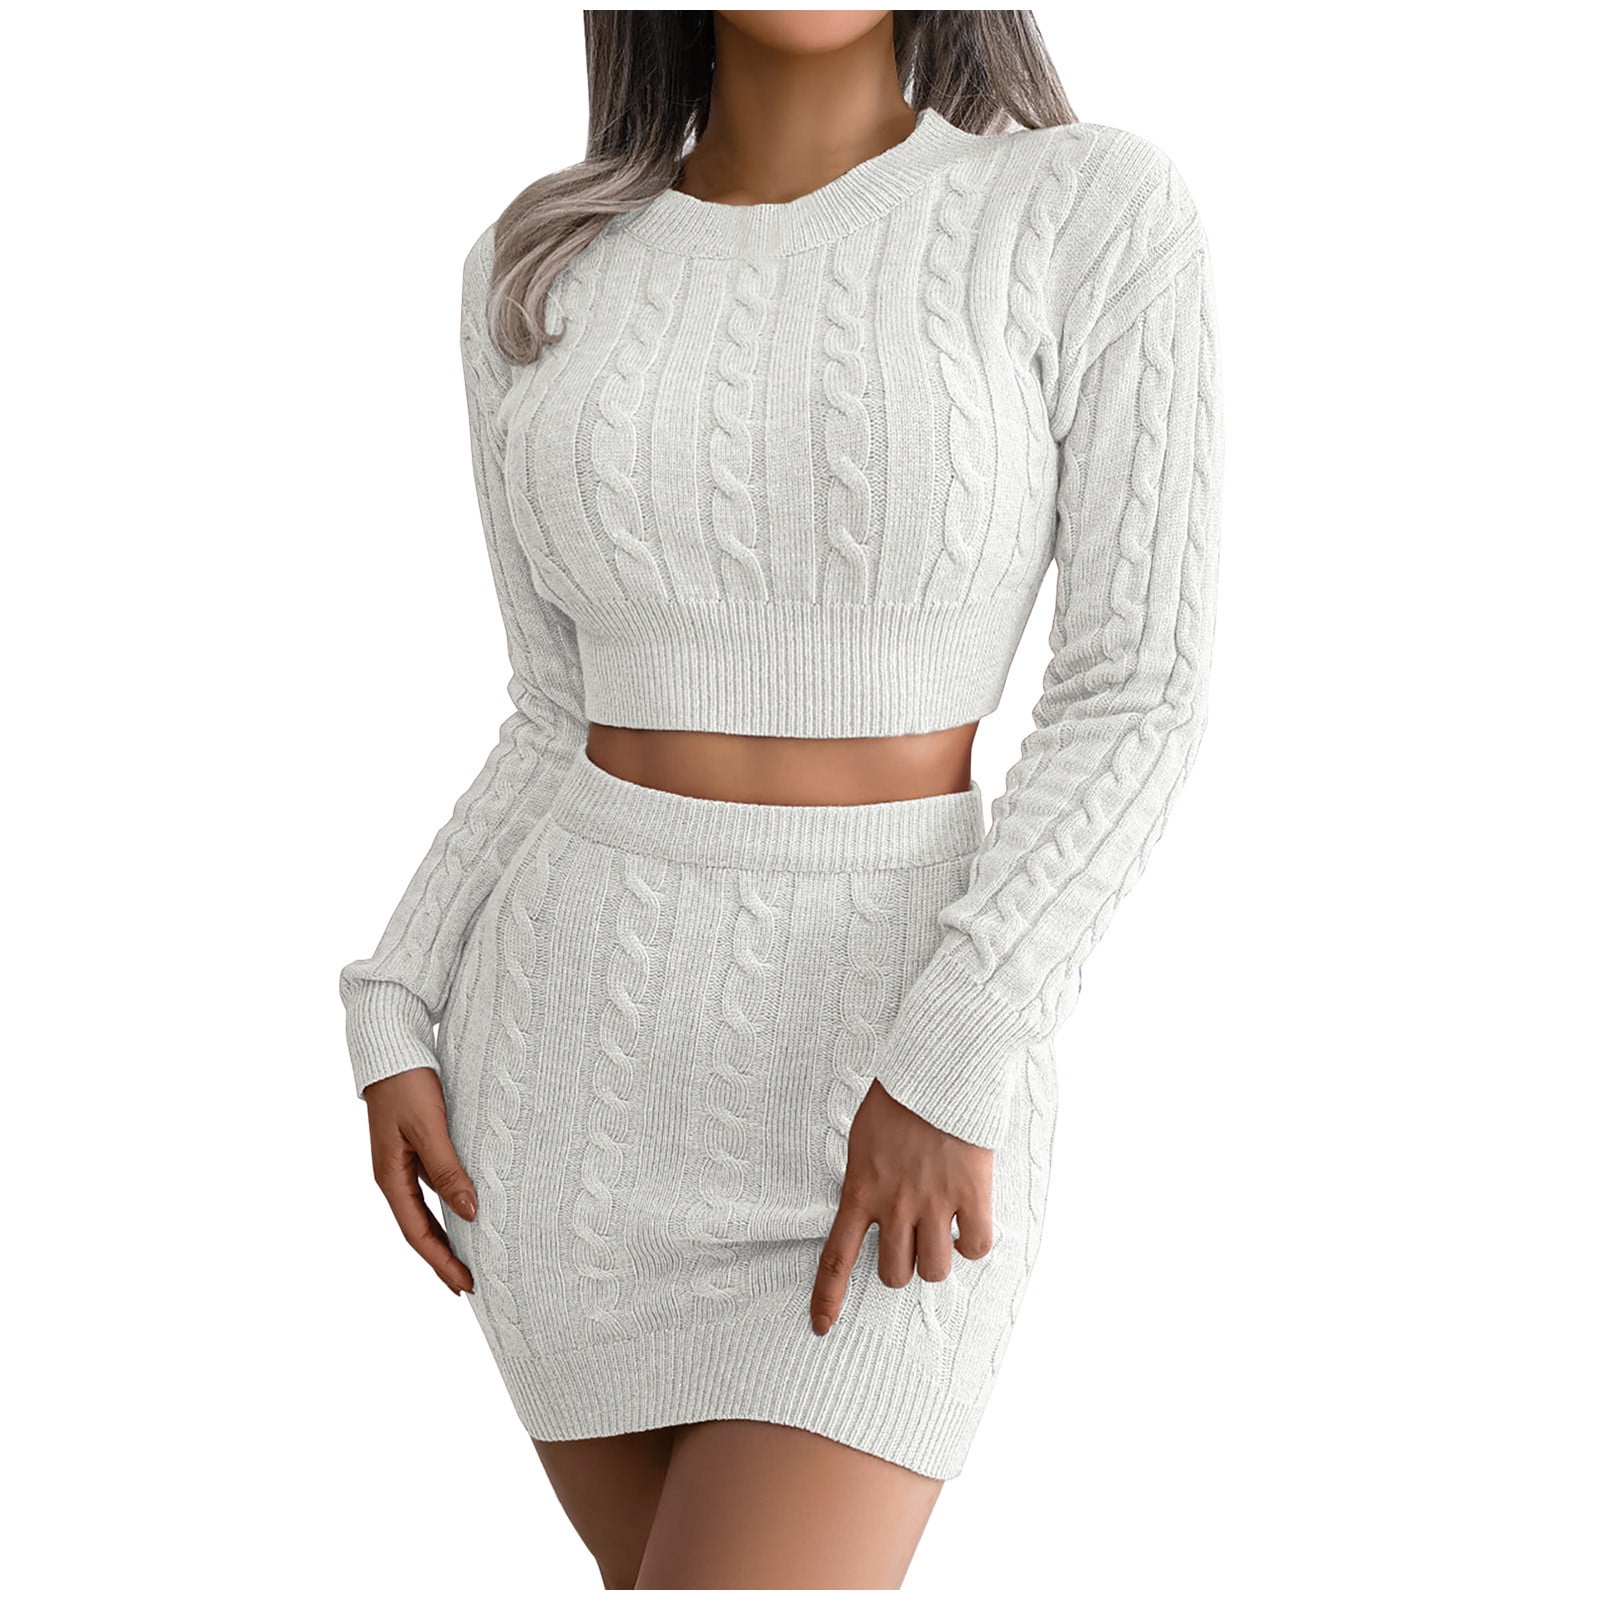 Chiccall Women's 2 Piece Knit Outfits Solid Color Crop Top Bodycon Skirt Set  Sweater on Clearance 